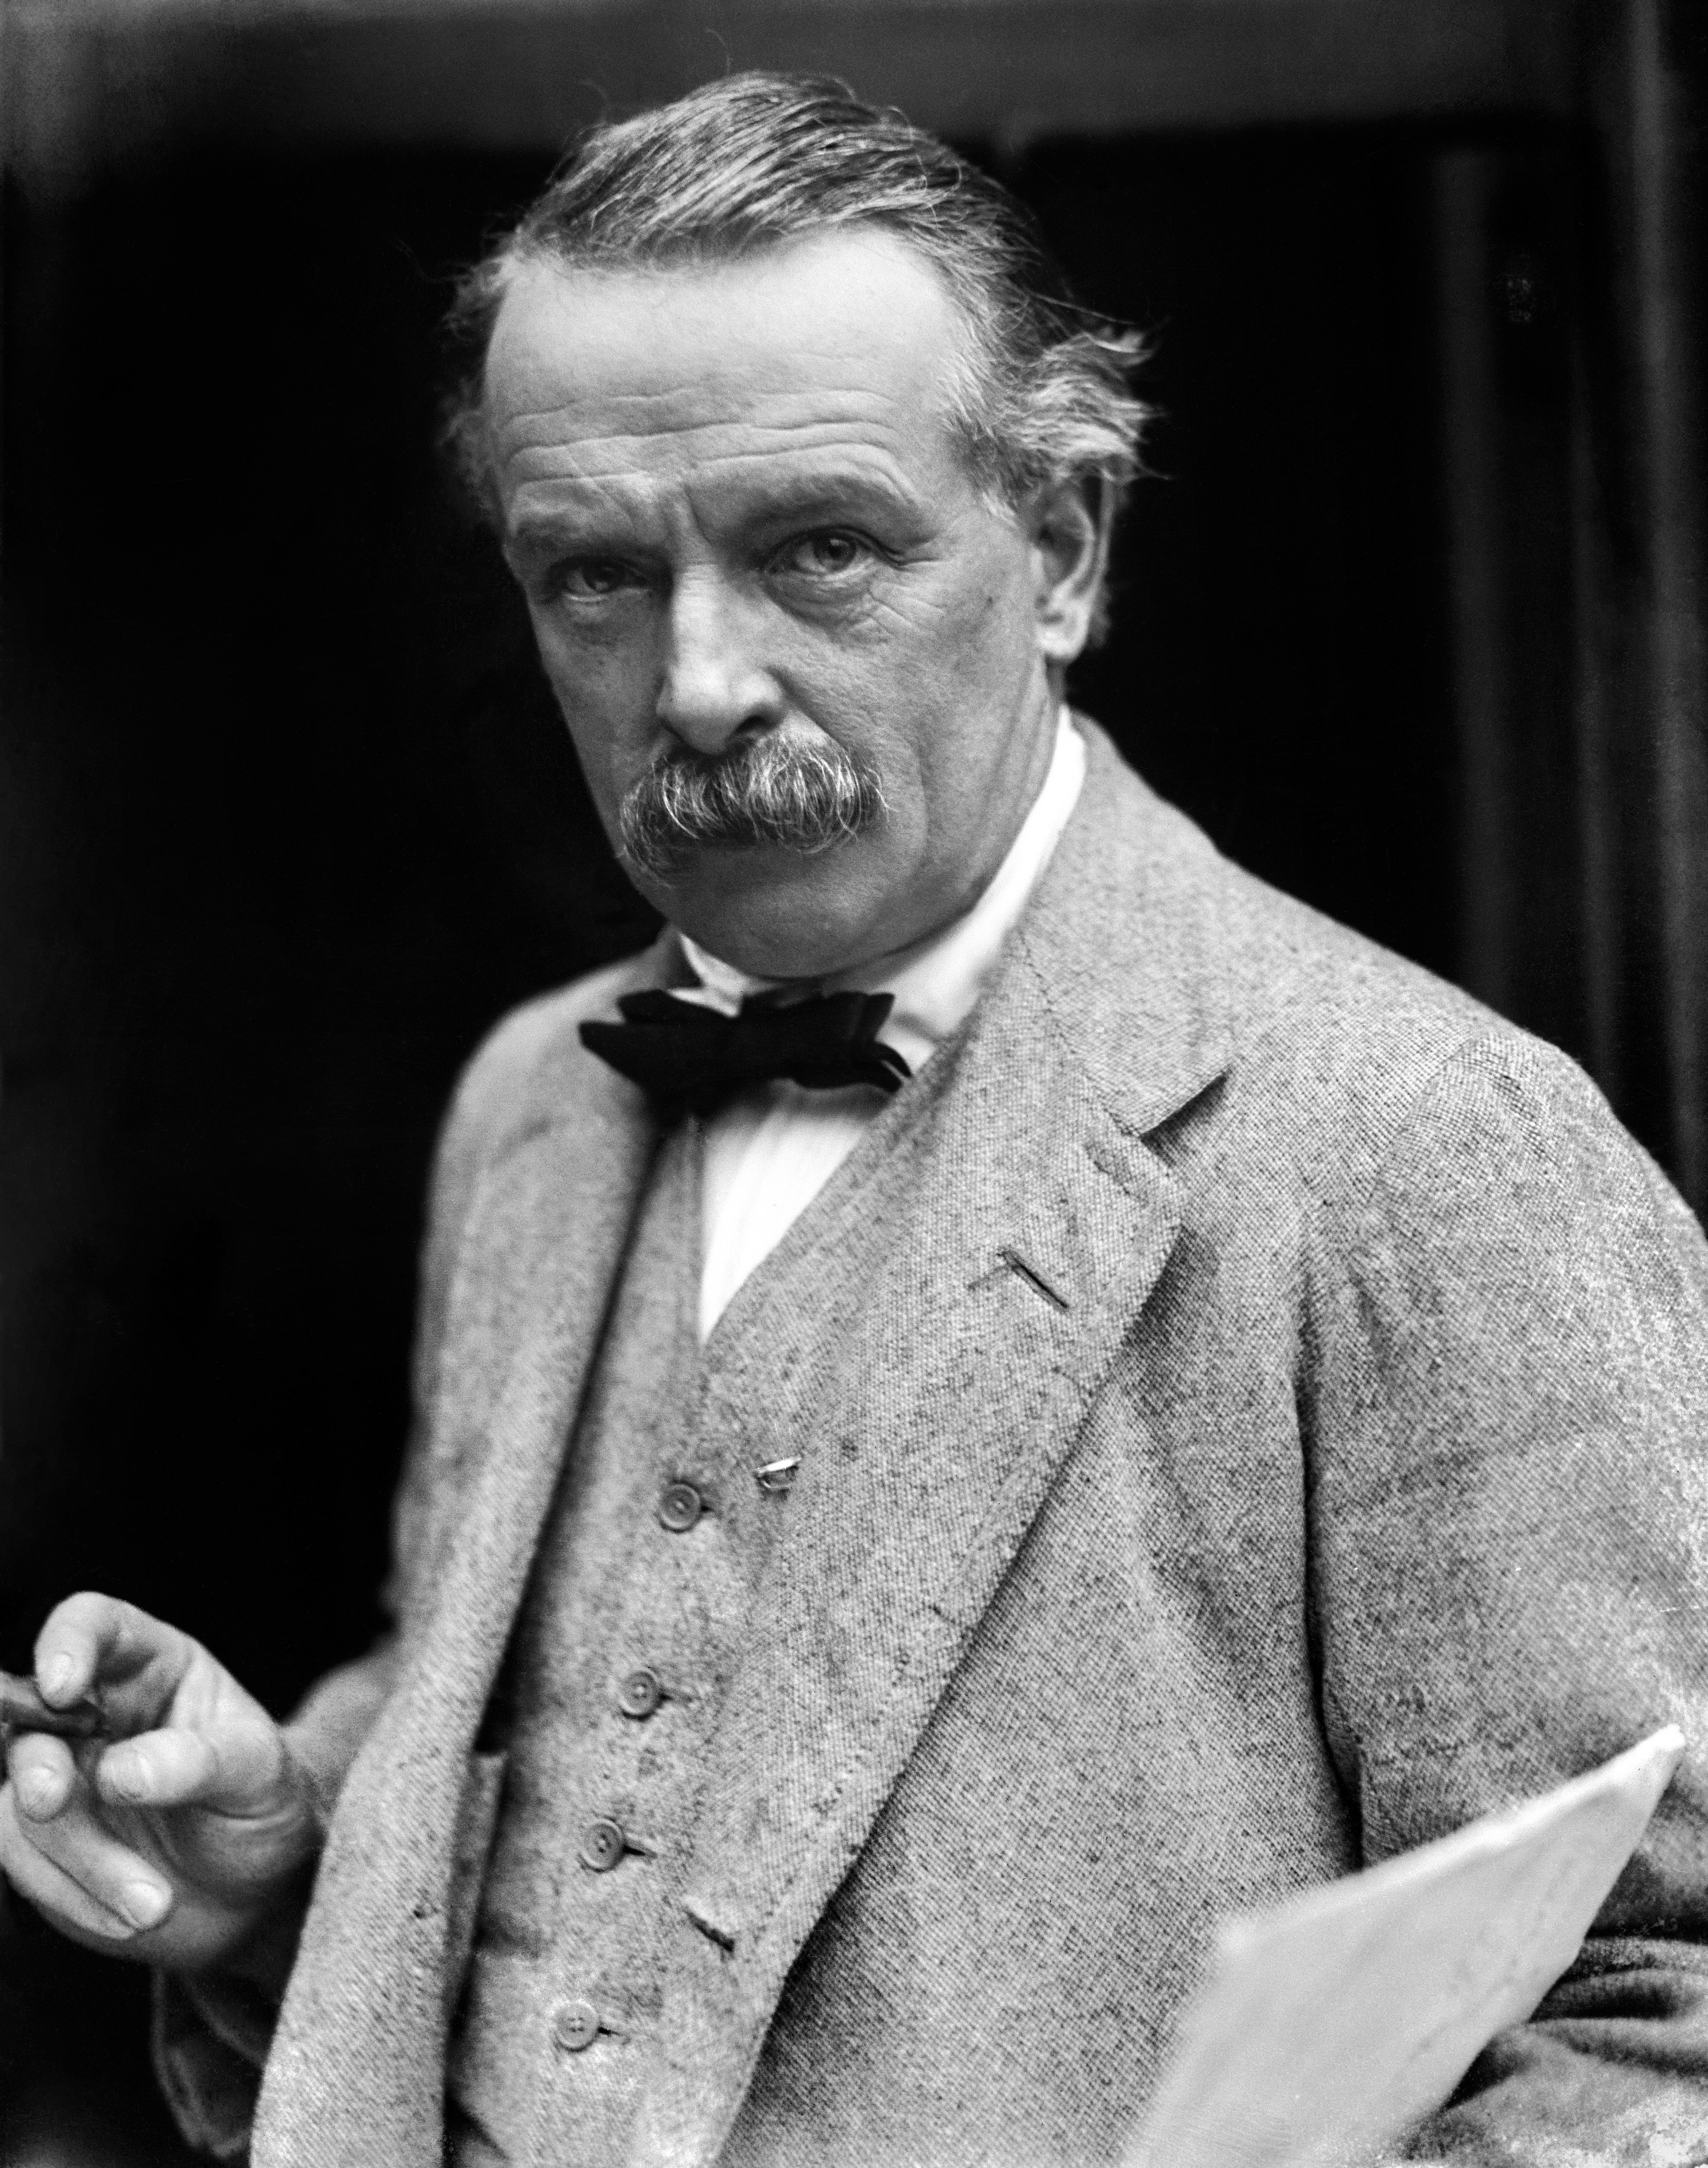 David Lloyd George spent June 19 1921 at Chequers with his wife Margaret, son Richard and his family (PA)